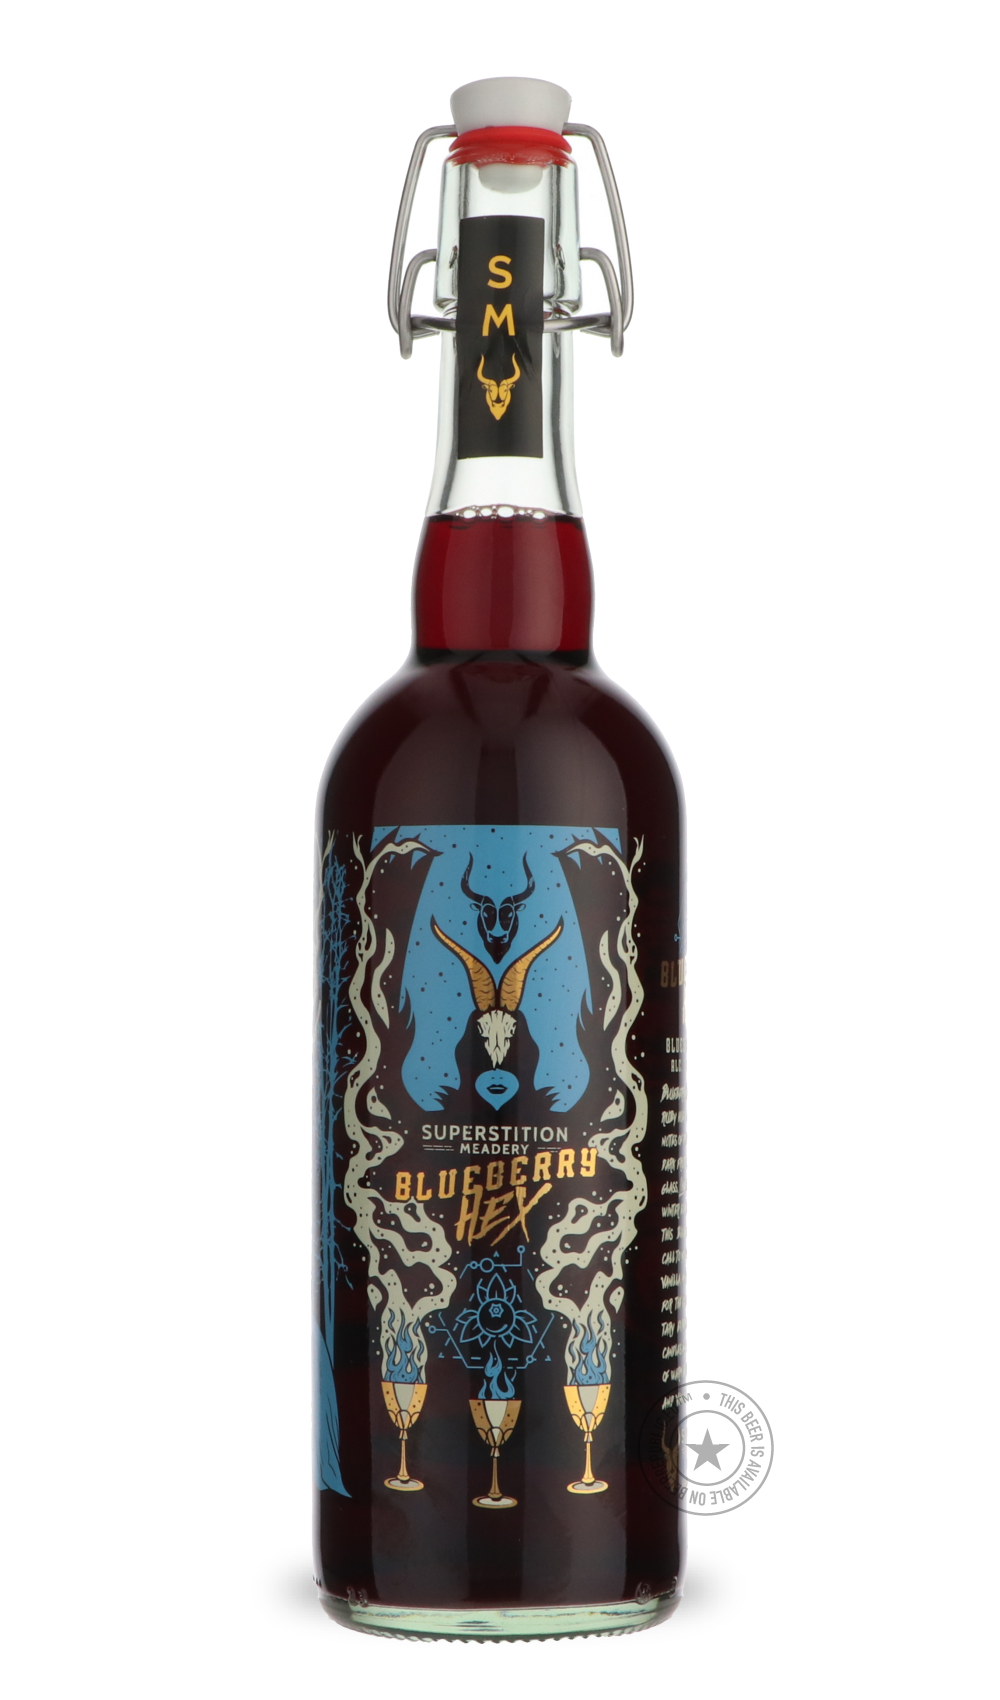 -Superstition Meadery- Blueberry Hex-Specials- Only @ Beer Republic - The best online beer store for American & Canadian craft beer - Buy beer online from the USA and Canada - Bier online kopen - Amerikaans bier kopen - Craft beer store - Craft beer kopen - Amerikanisch bier kaufen - Bier online kaufen - Acheter biere online - IPA - Stout - Porter - New England IPA - Hazy IPA - Imperial Stout - Barrel Aged - Barrel Aged Imperial Stout - Brown - Dark beer - Blond - Blonde - Pilsner - Lager - Wheat - Weizen -